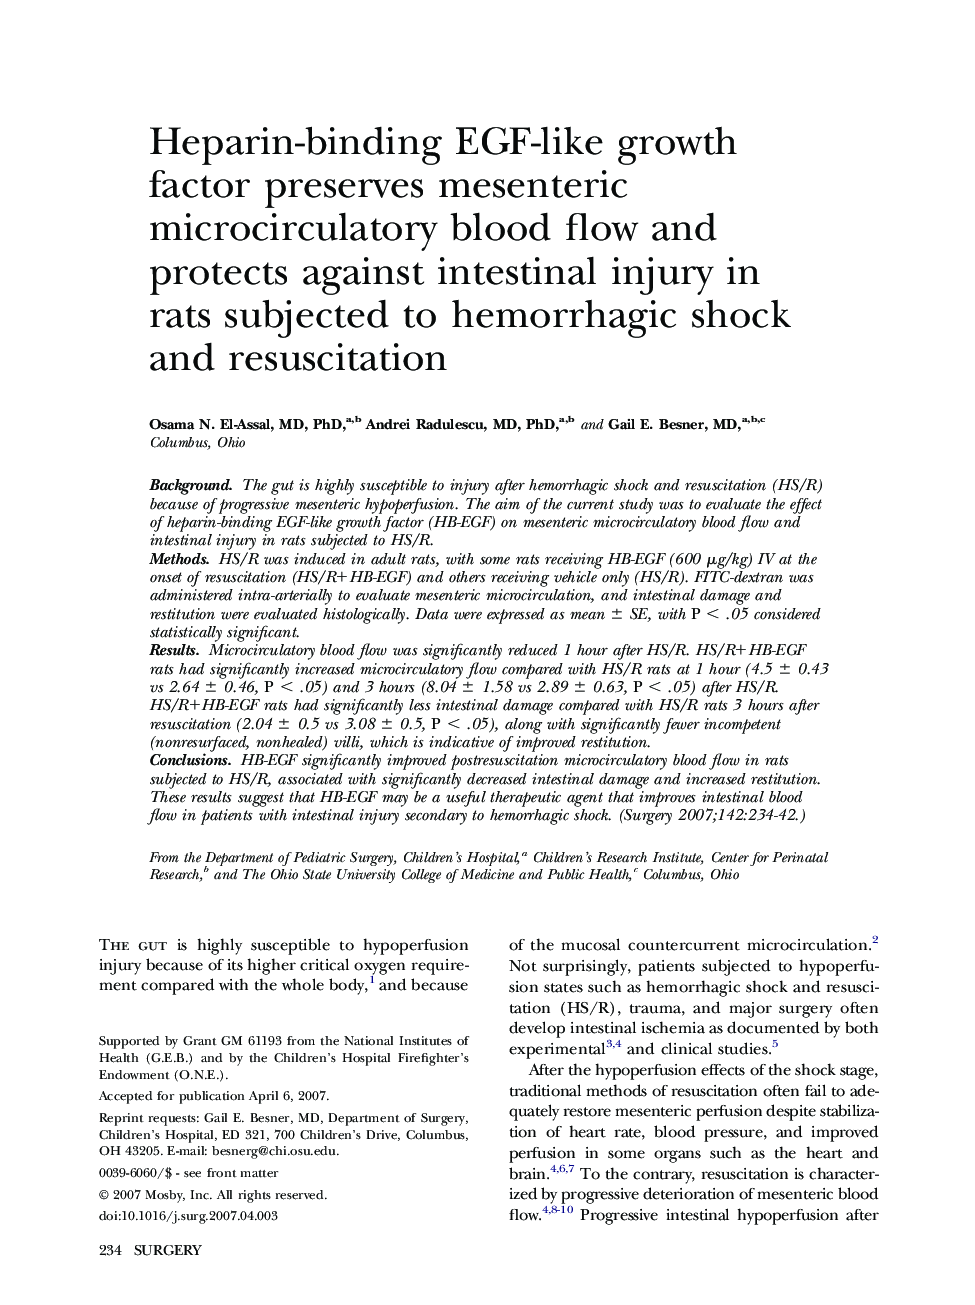 Heparin-binding EGF-like growth factor preserves mesenteric microcirculatory blood flow and protects against intestinal injury in rats subjected to hemorrhagic shock and resuscitation 